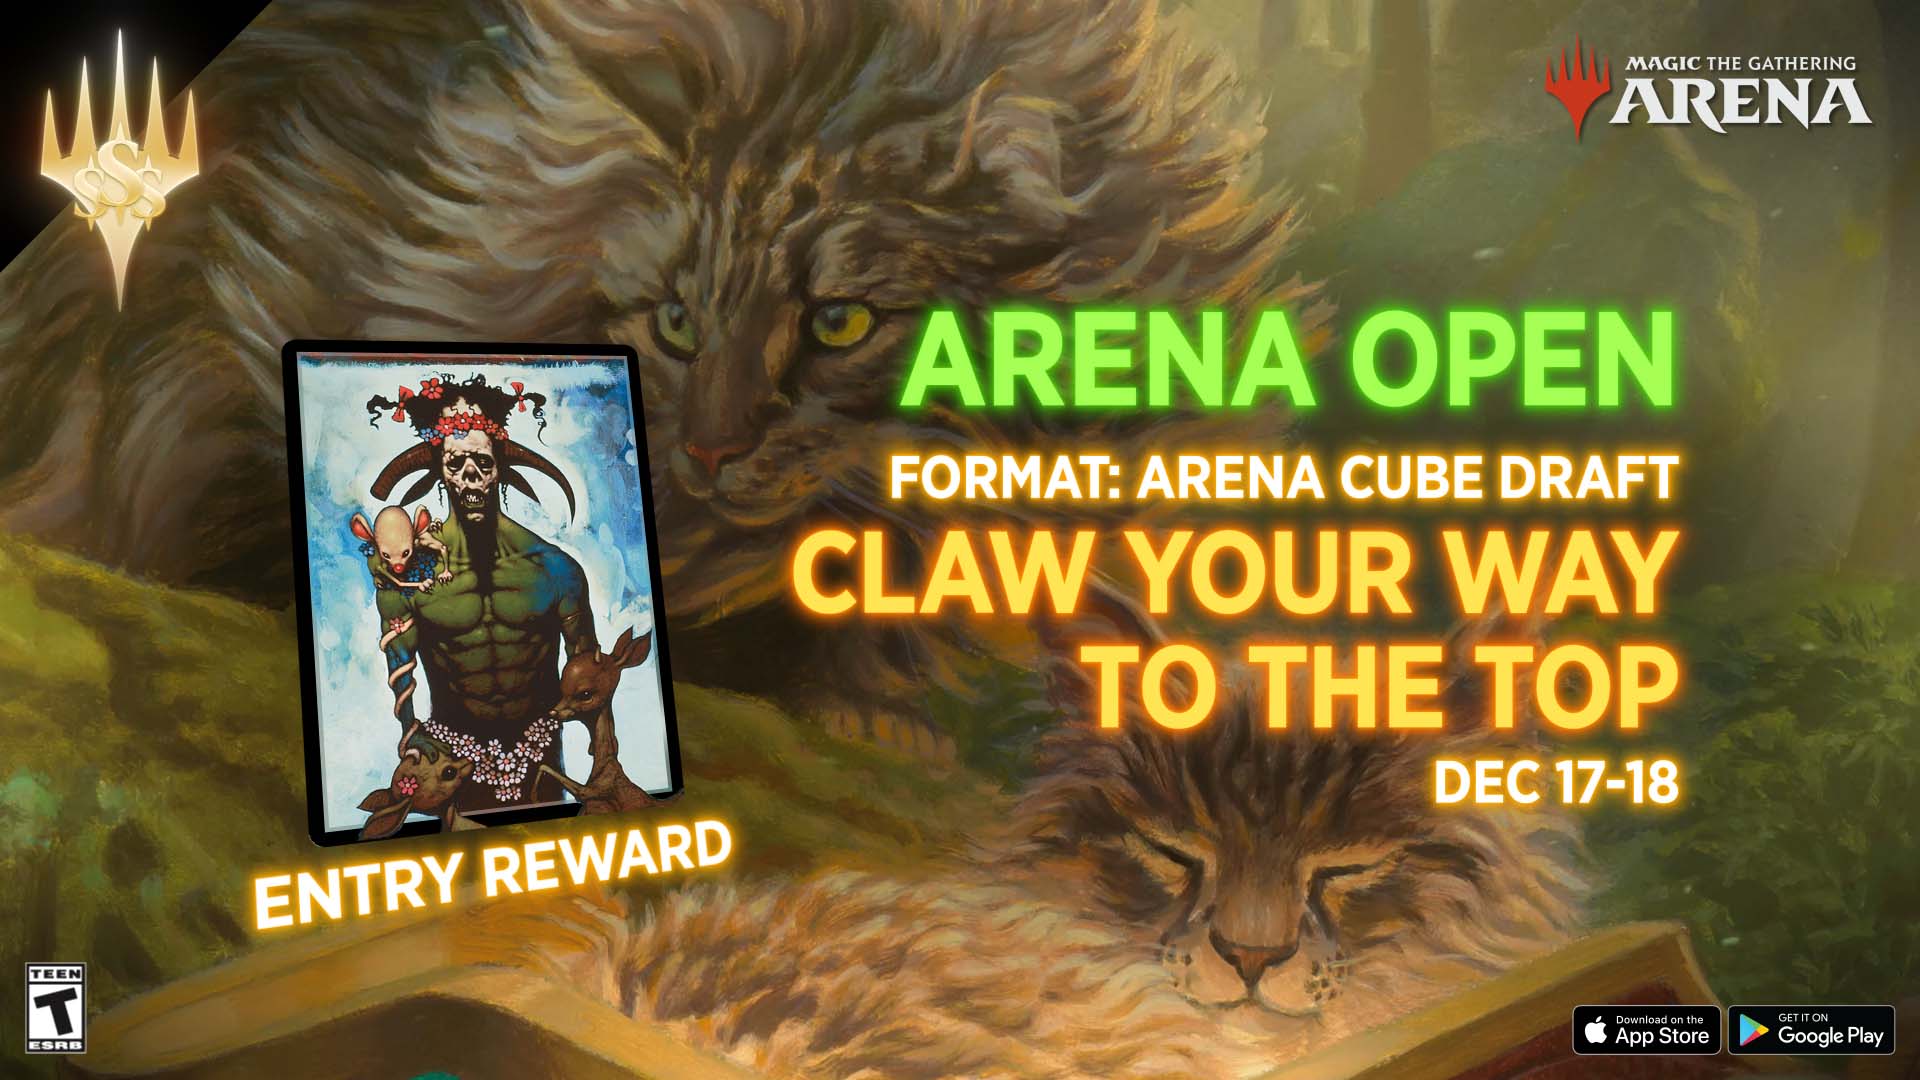 The Arena Open: Arena Cube event December 17–18